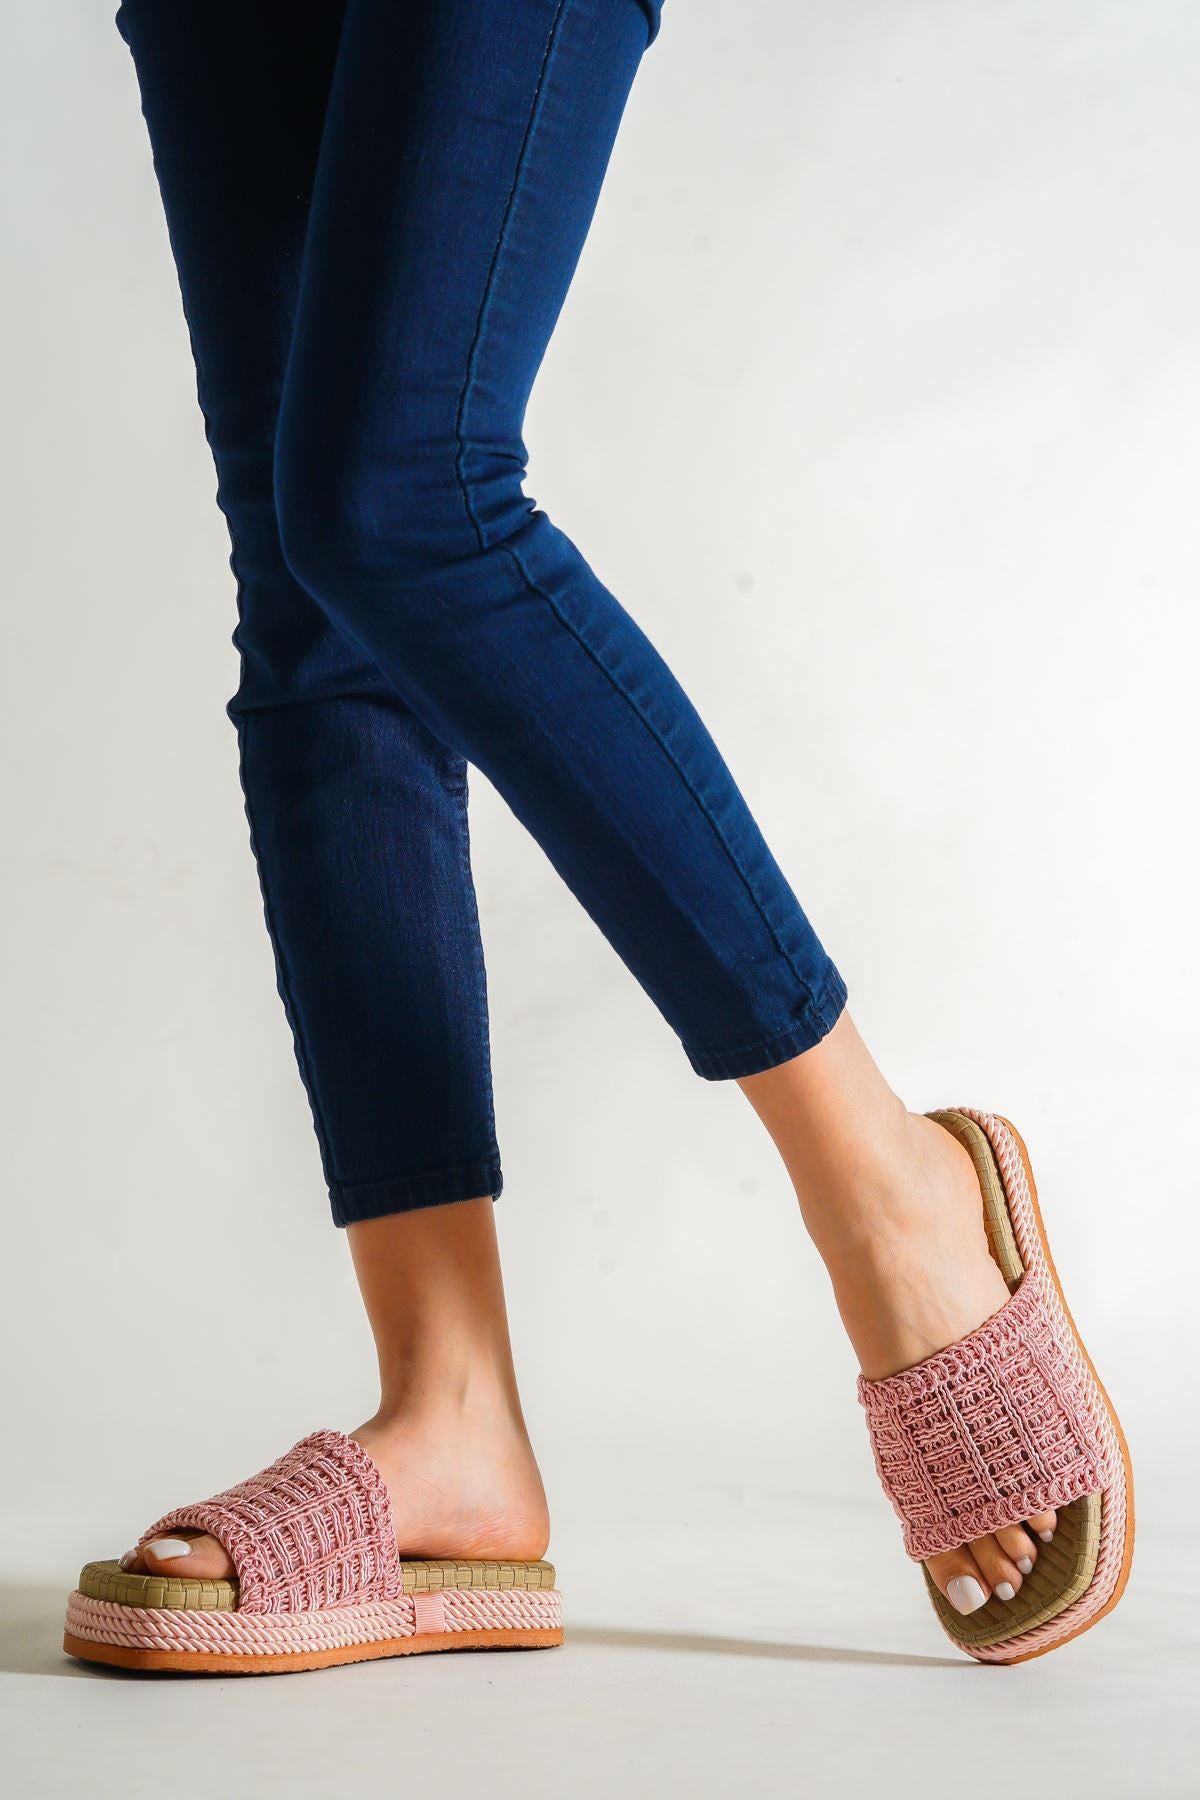 Women's Tokyo Pink Knitted Slippers - STREETMODE™